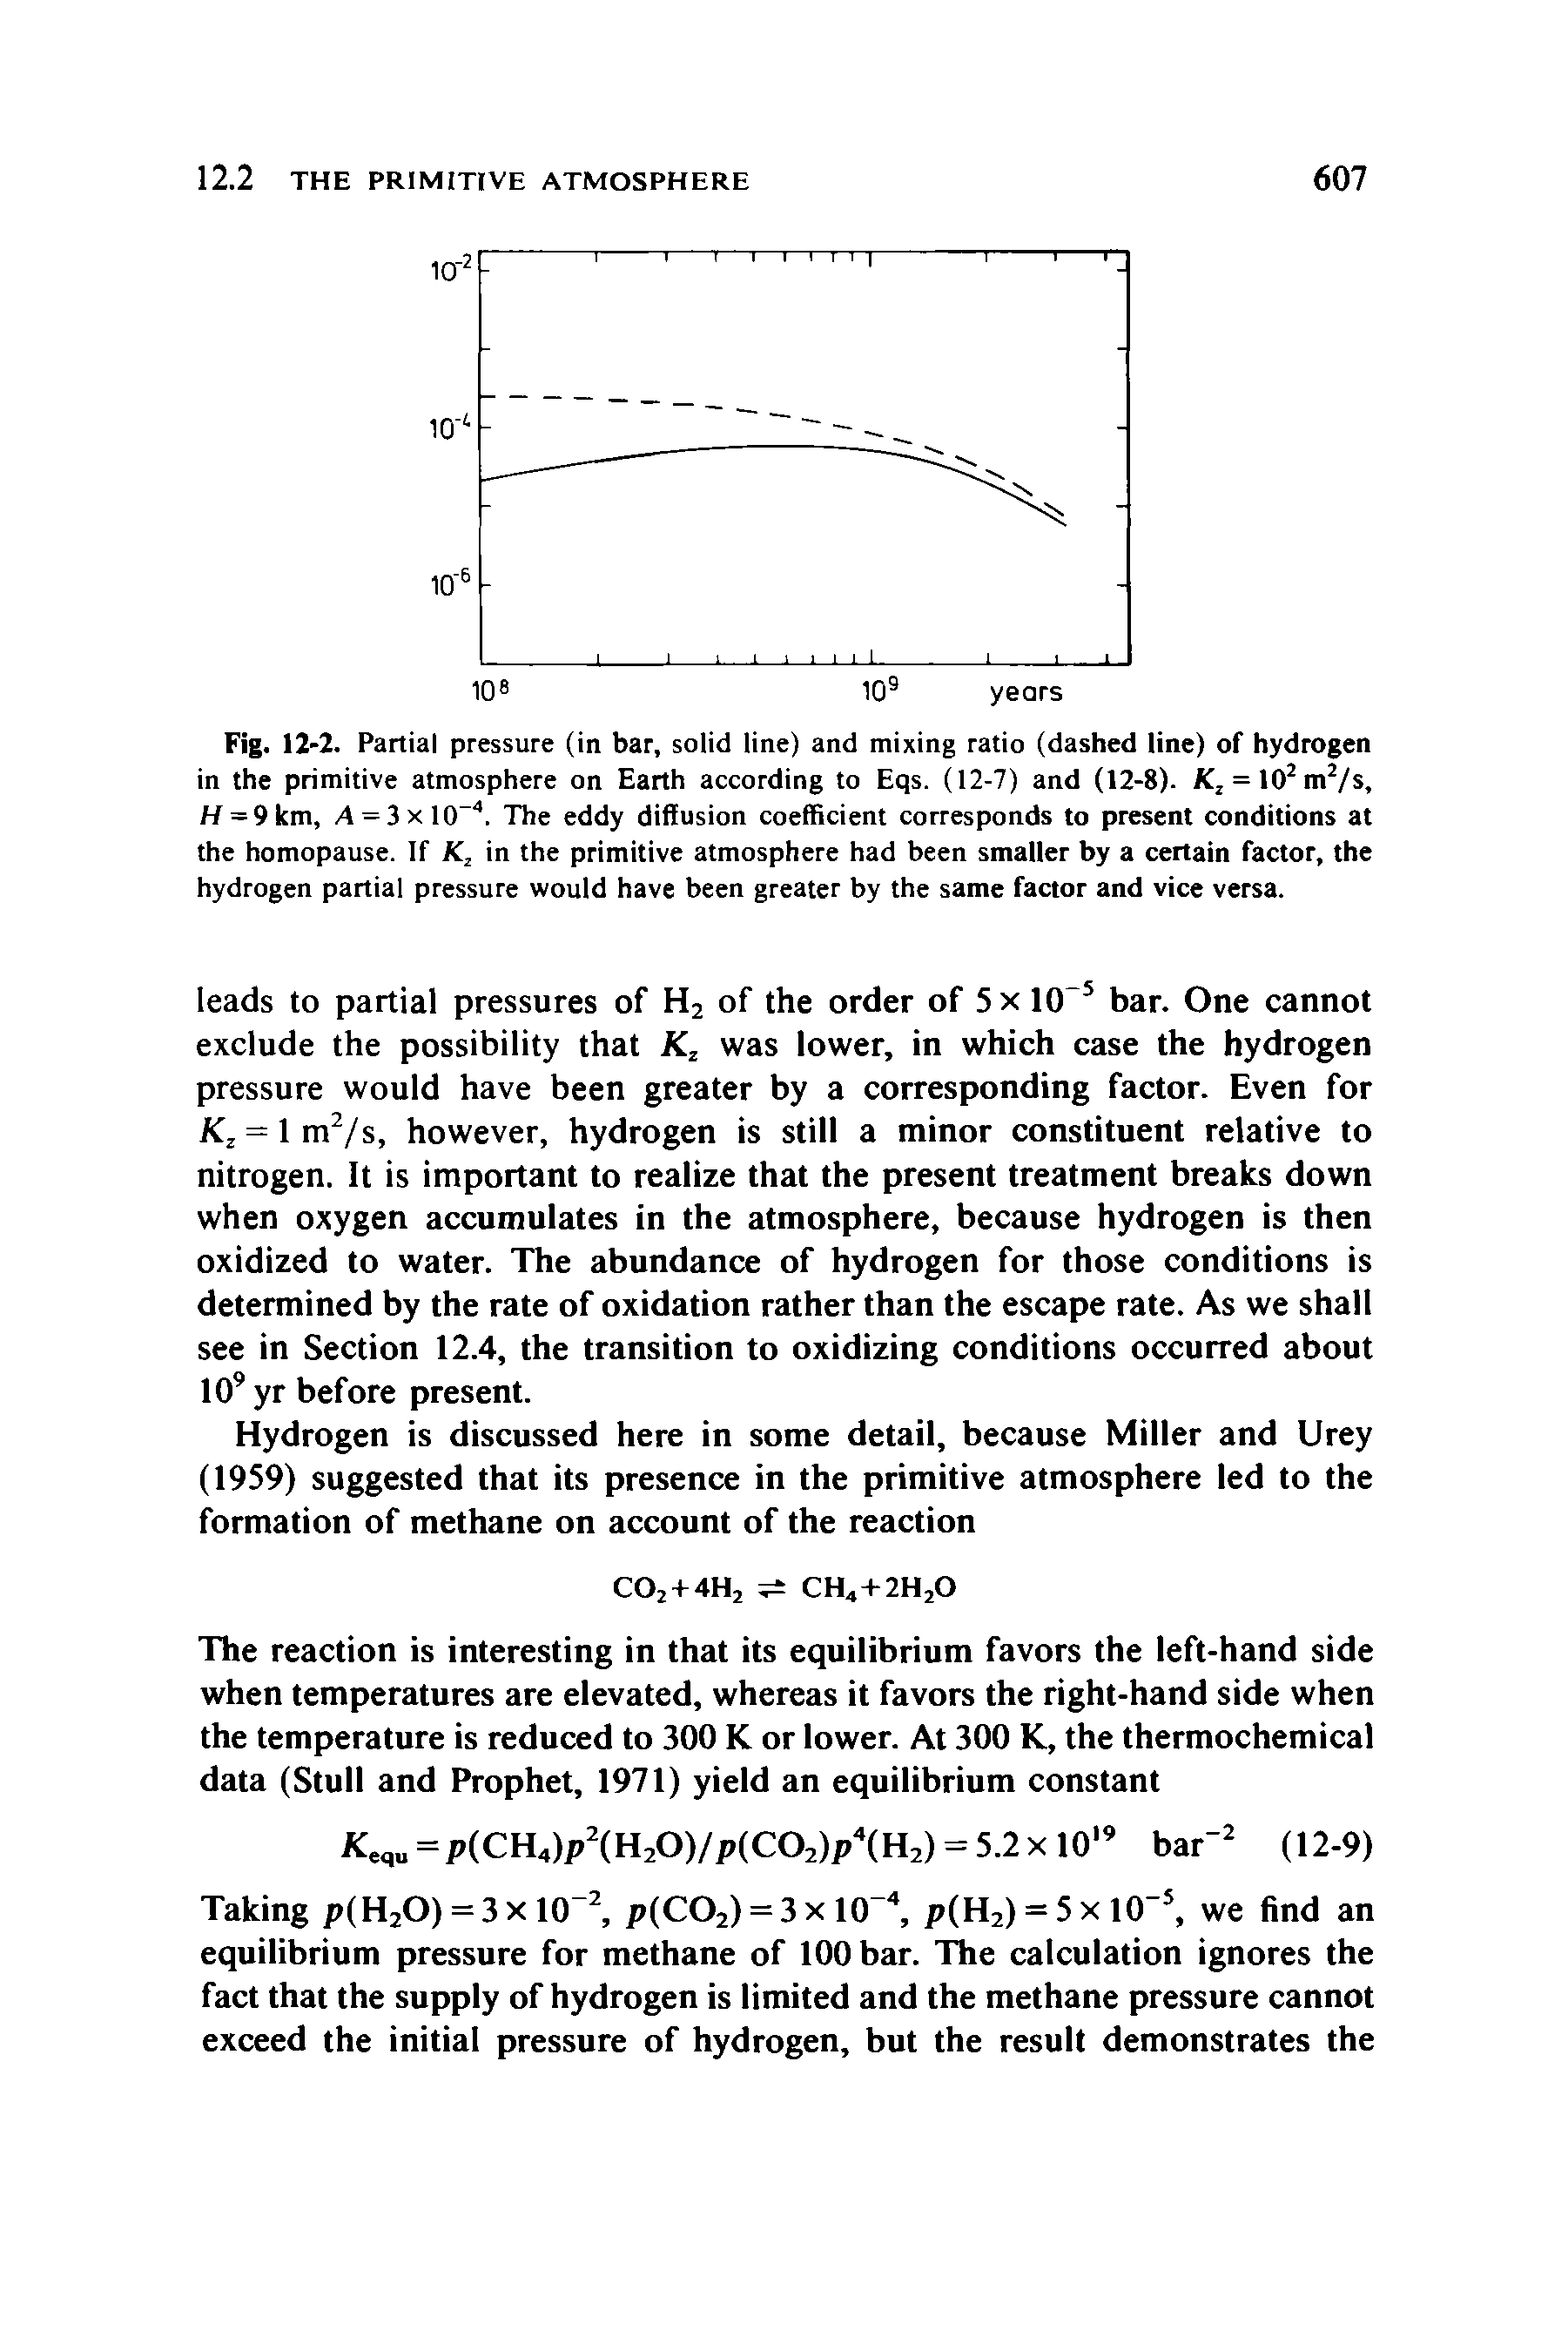 Fig. 12-2. Partial pressure (in bar, solid line) and mixing ratio (dashed line) of hydrogen in the primitive atmosphere on Earth according to Eqs. (12-7) and (12-8). K2 = 102m2/s, H = 9 km, A = 3 x KT4. The eddy diffusion coefficient corresponds to present conditions at the homopause. If K2 in the primitive atmosphere had been smaller by a certain factor, the hydrogen partial pressure would have been greater by the same factor and vice versa.